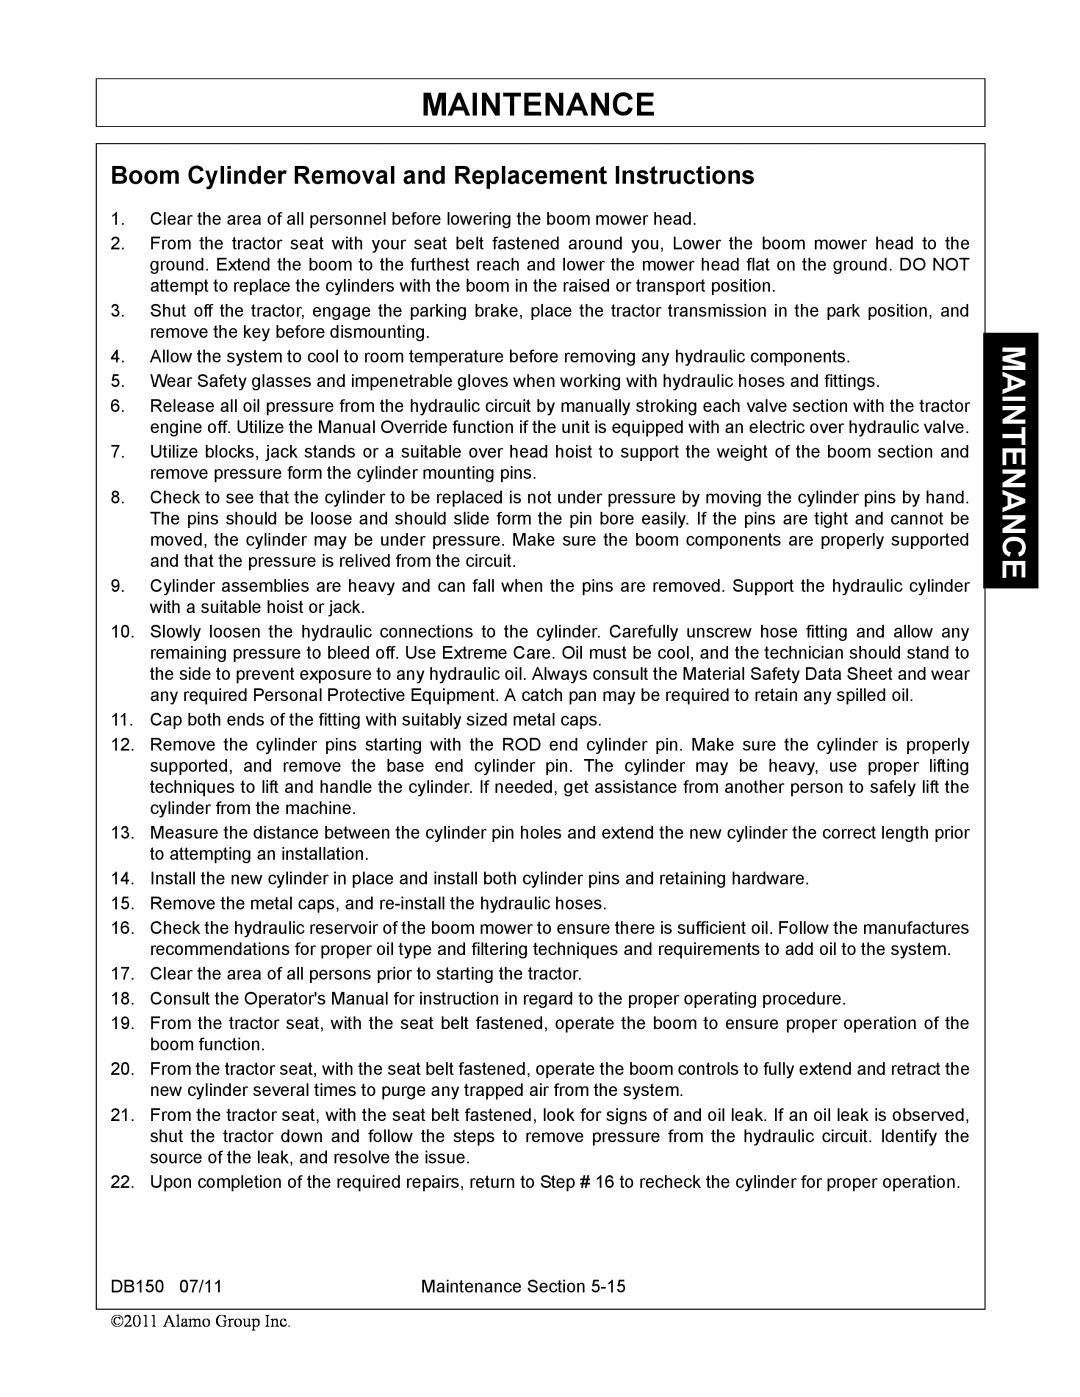 Rhino Mounts DB150 manual Boom Cylinder Removal and Replacement Instructions, Maintenance 